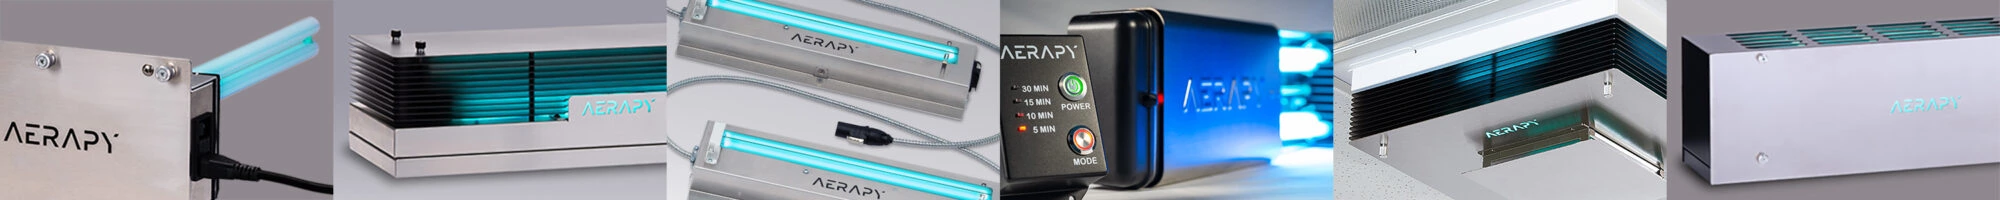 UV sanitizing light products from Aerapy